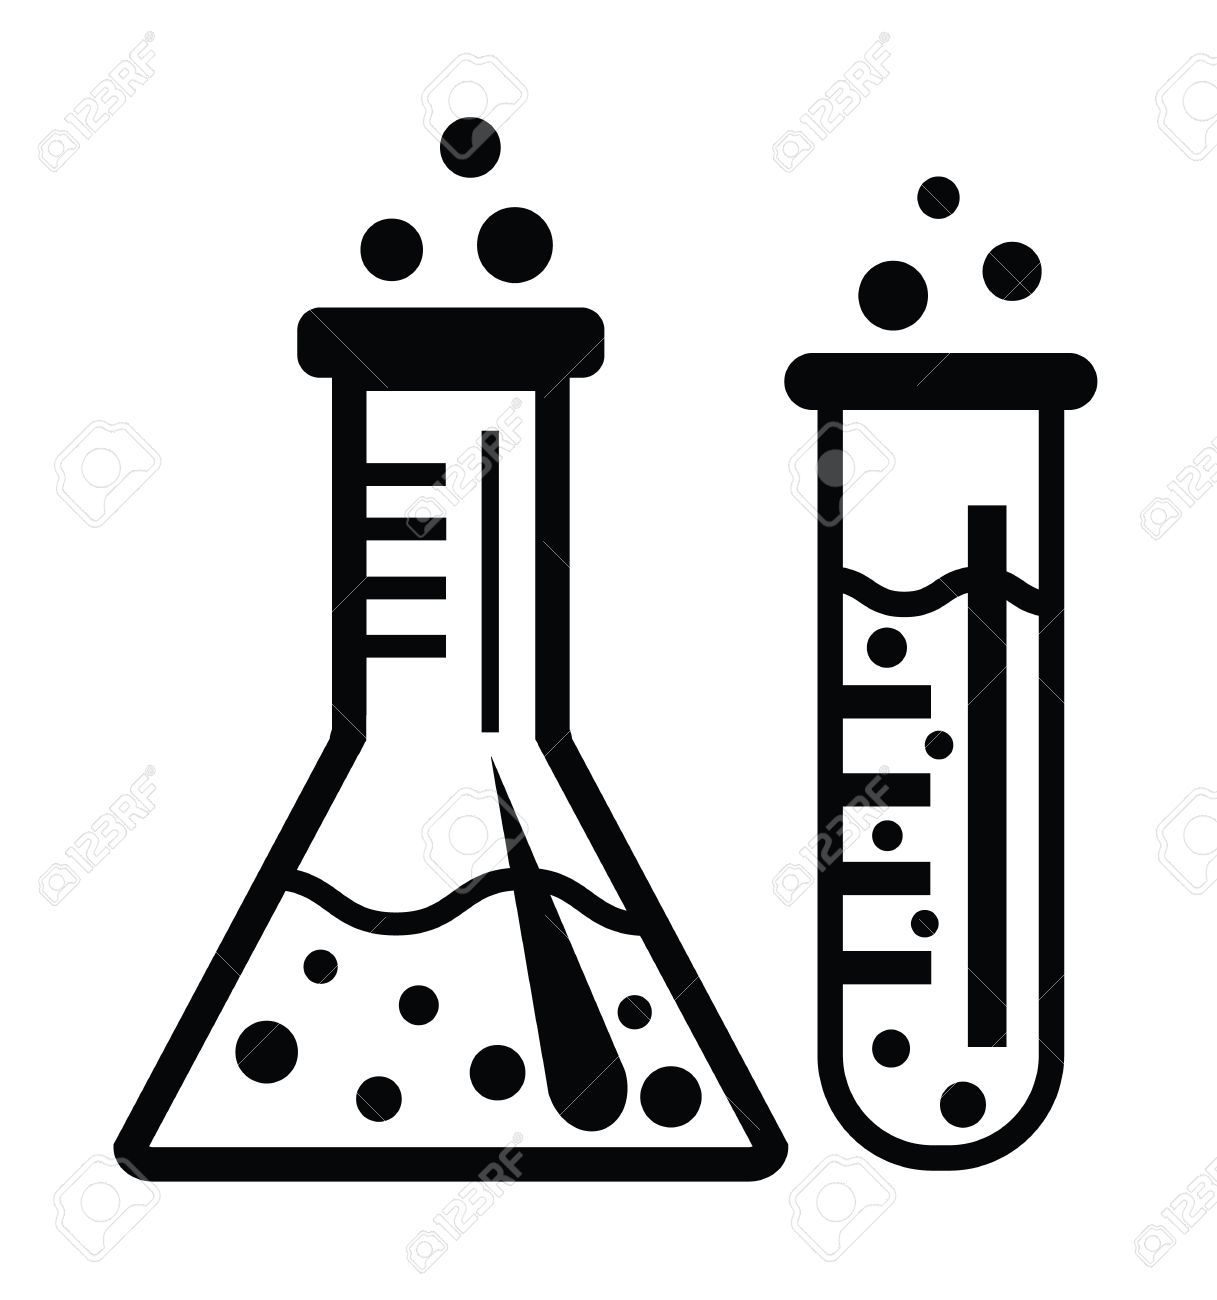 test tube clipart black and white 10 free Cliparts | Download images on